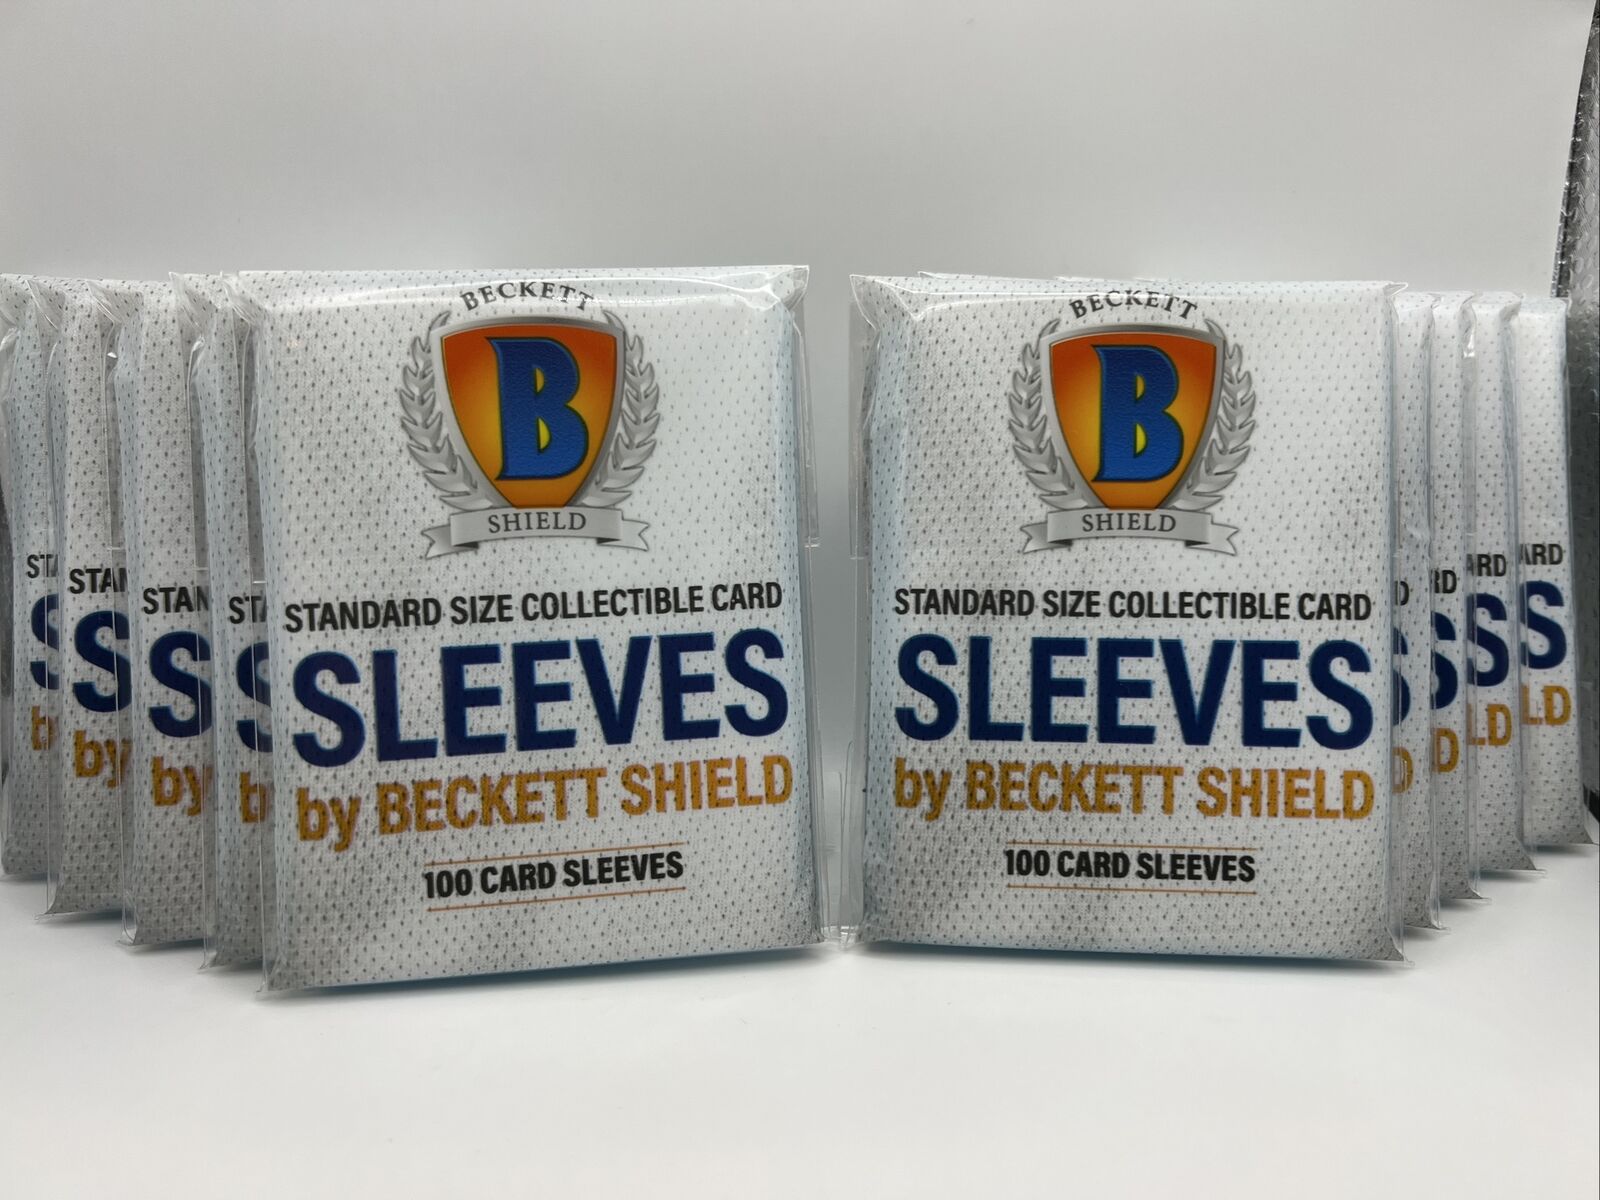 Beckett Shield Soft Penny Card Sleeves 10 Packs of 100 Sleeves for Standard Card